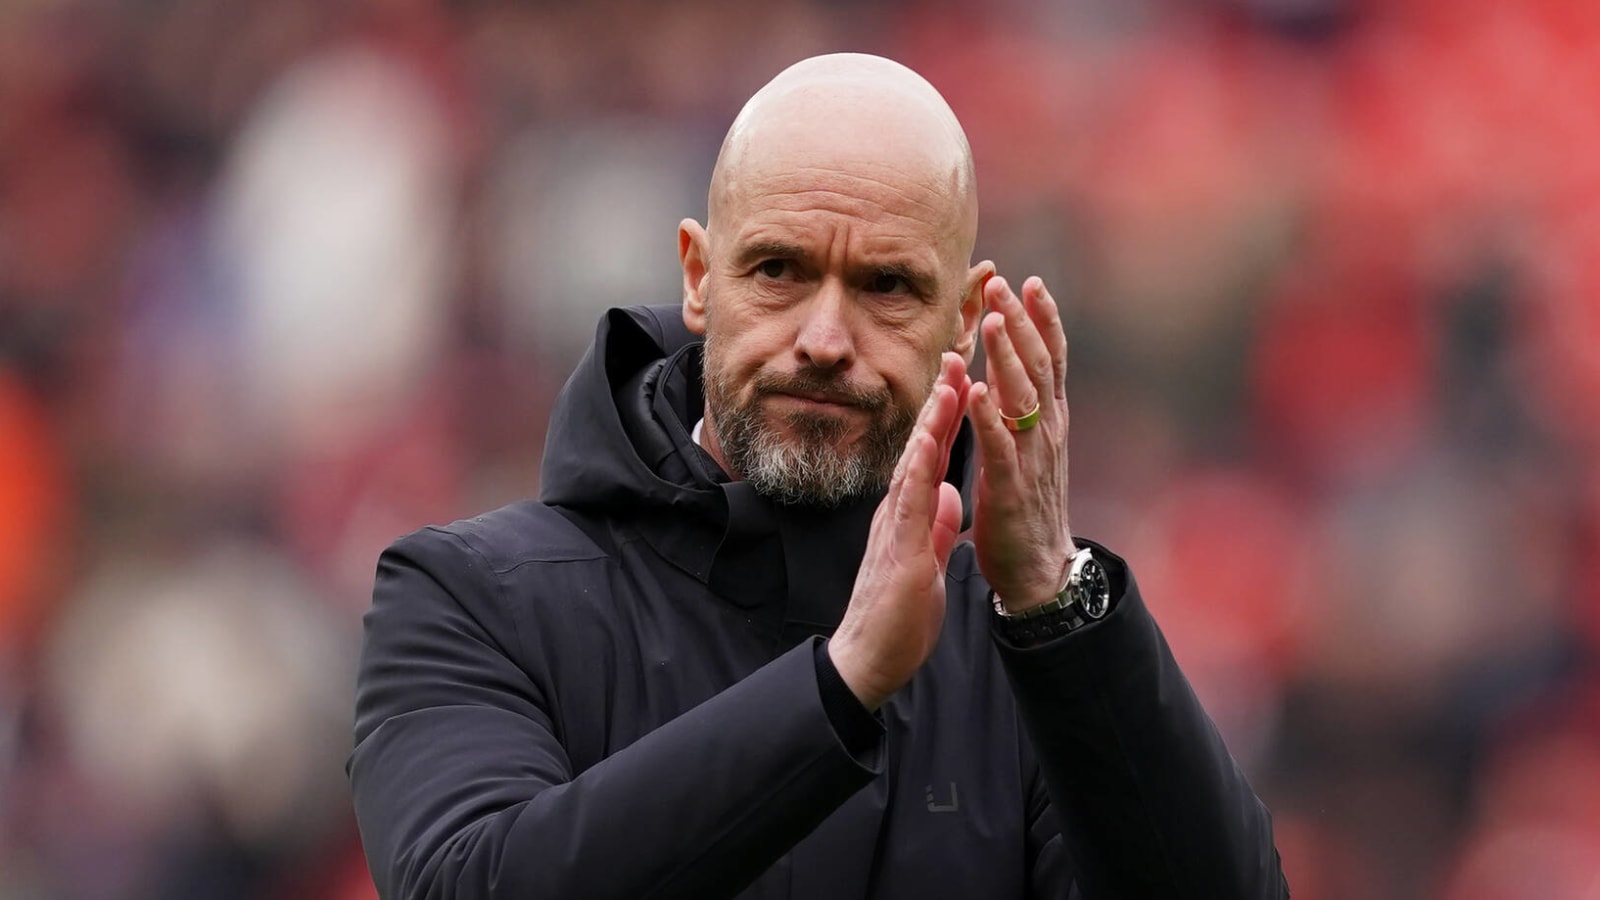 Scholes claims one United player ‘obviously’ disagrees with ‘something’ Ten Hag is doing after post-match gesture